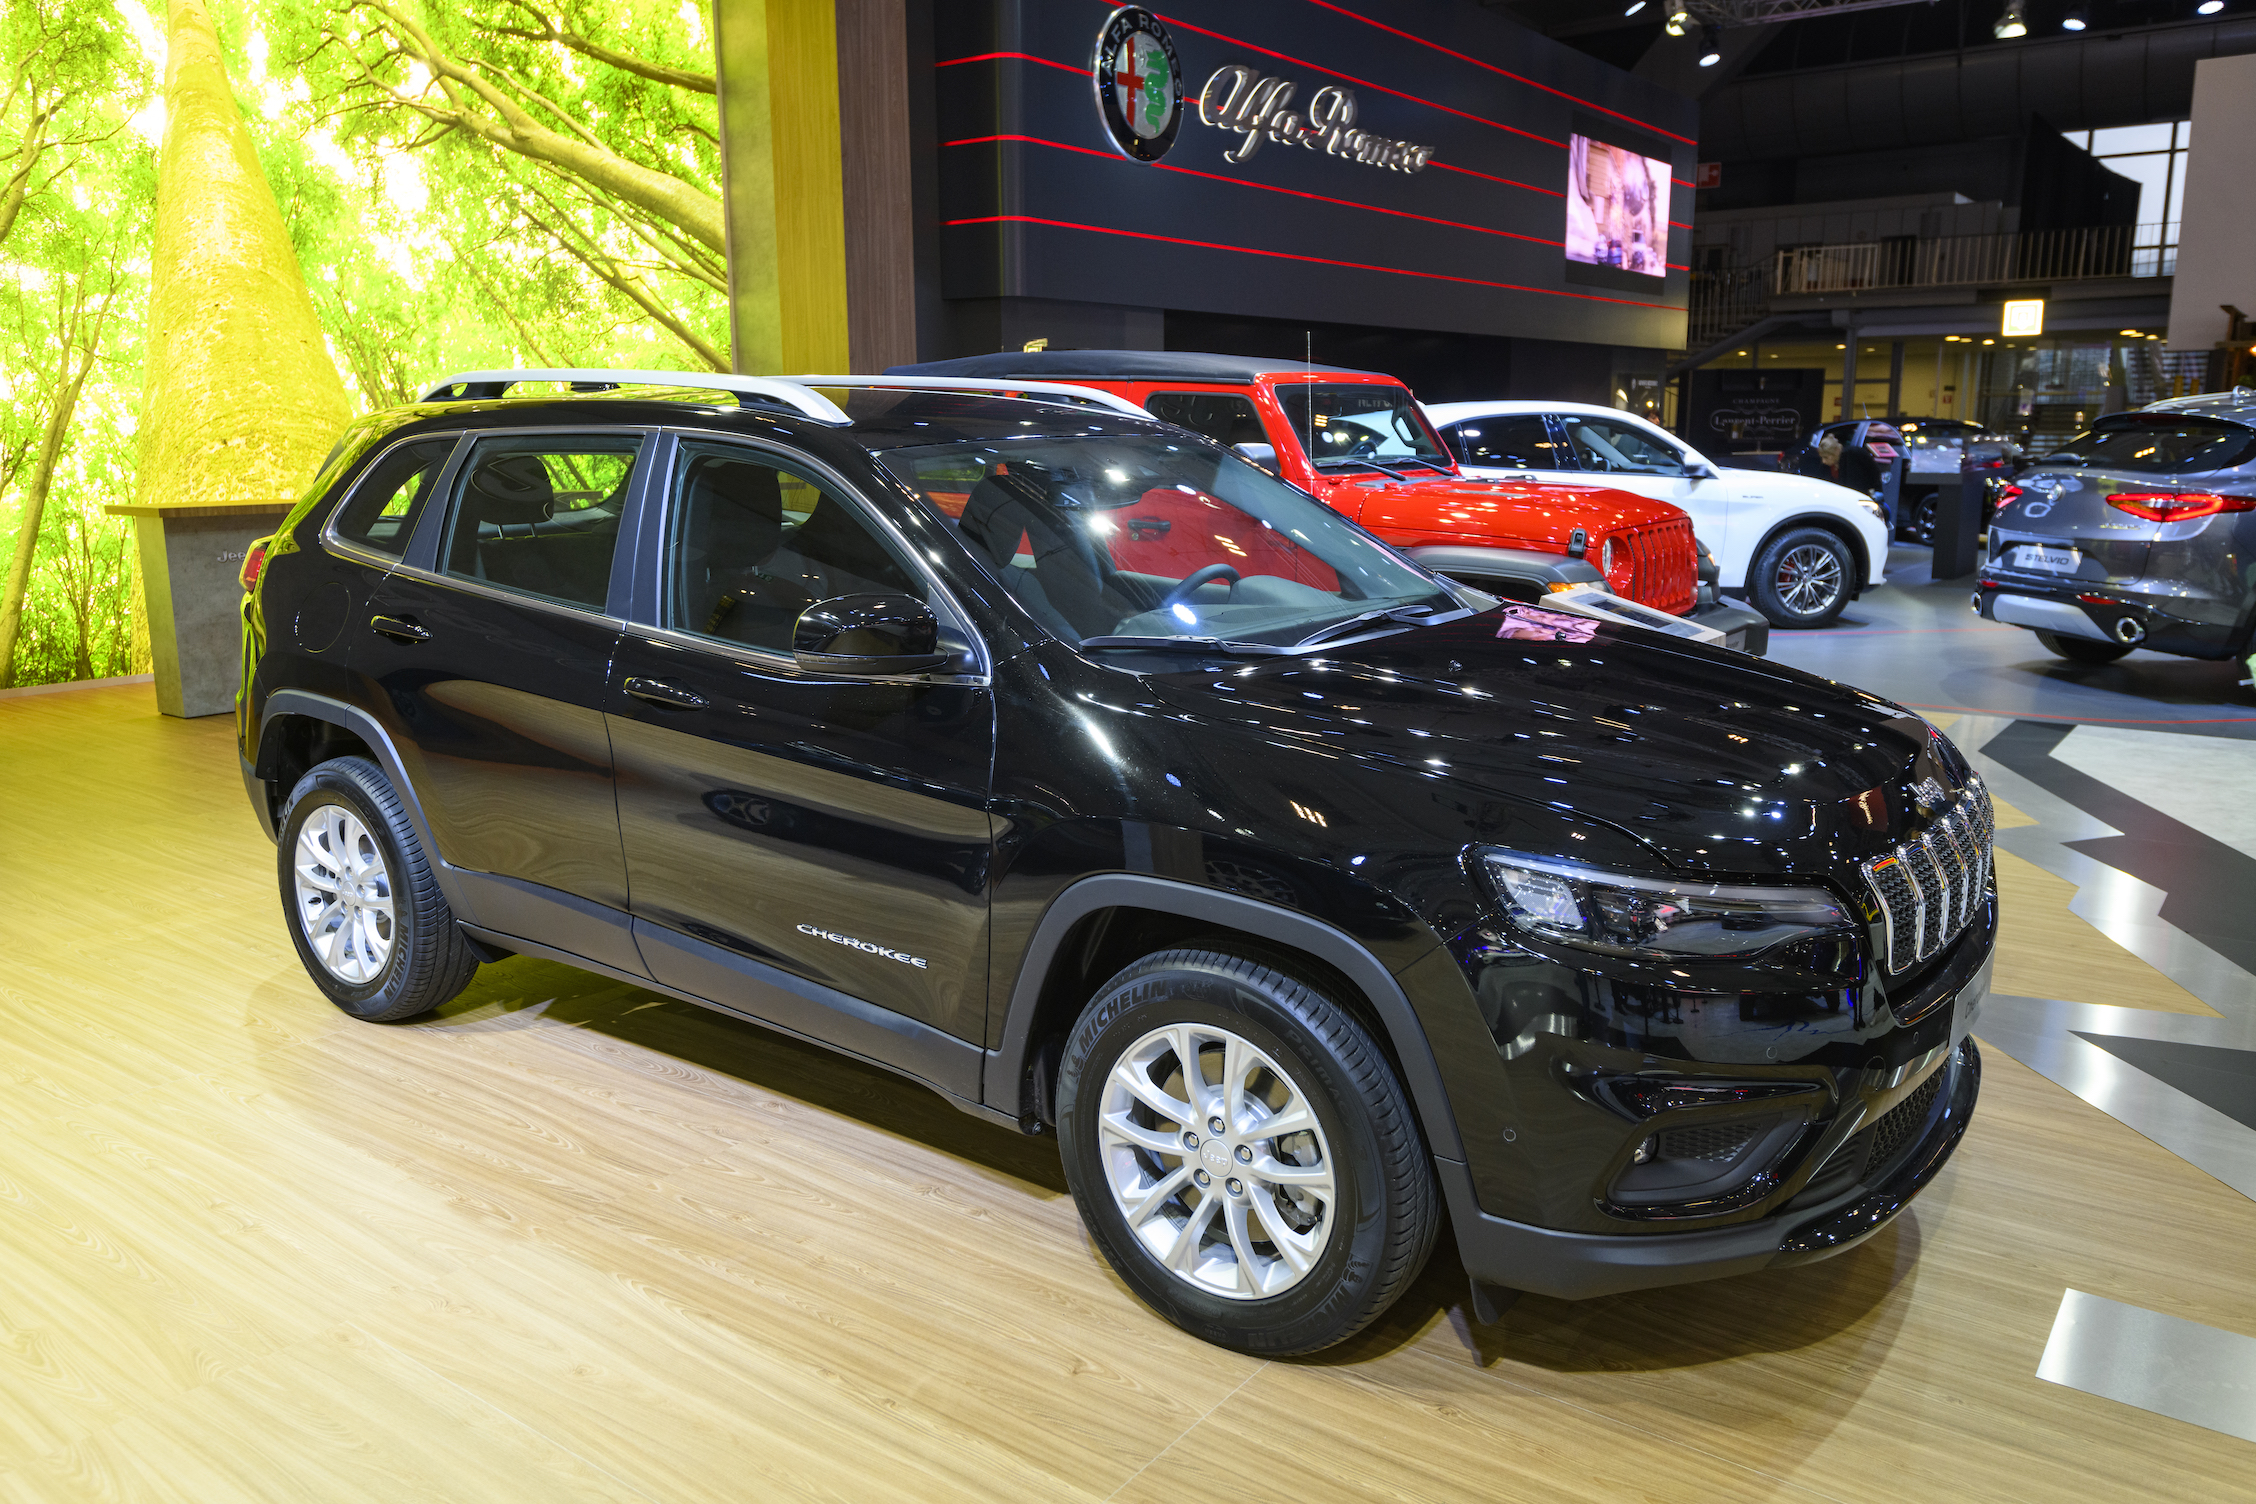 Jeep Cherokee SUV on display at Brussels Expo